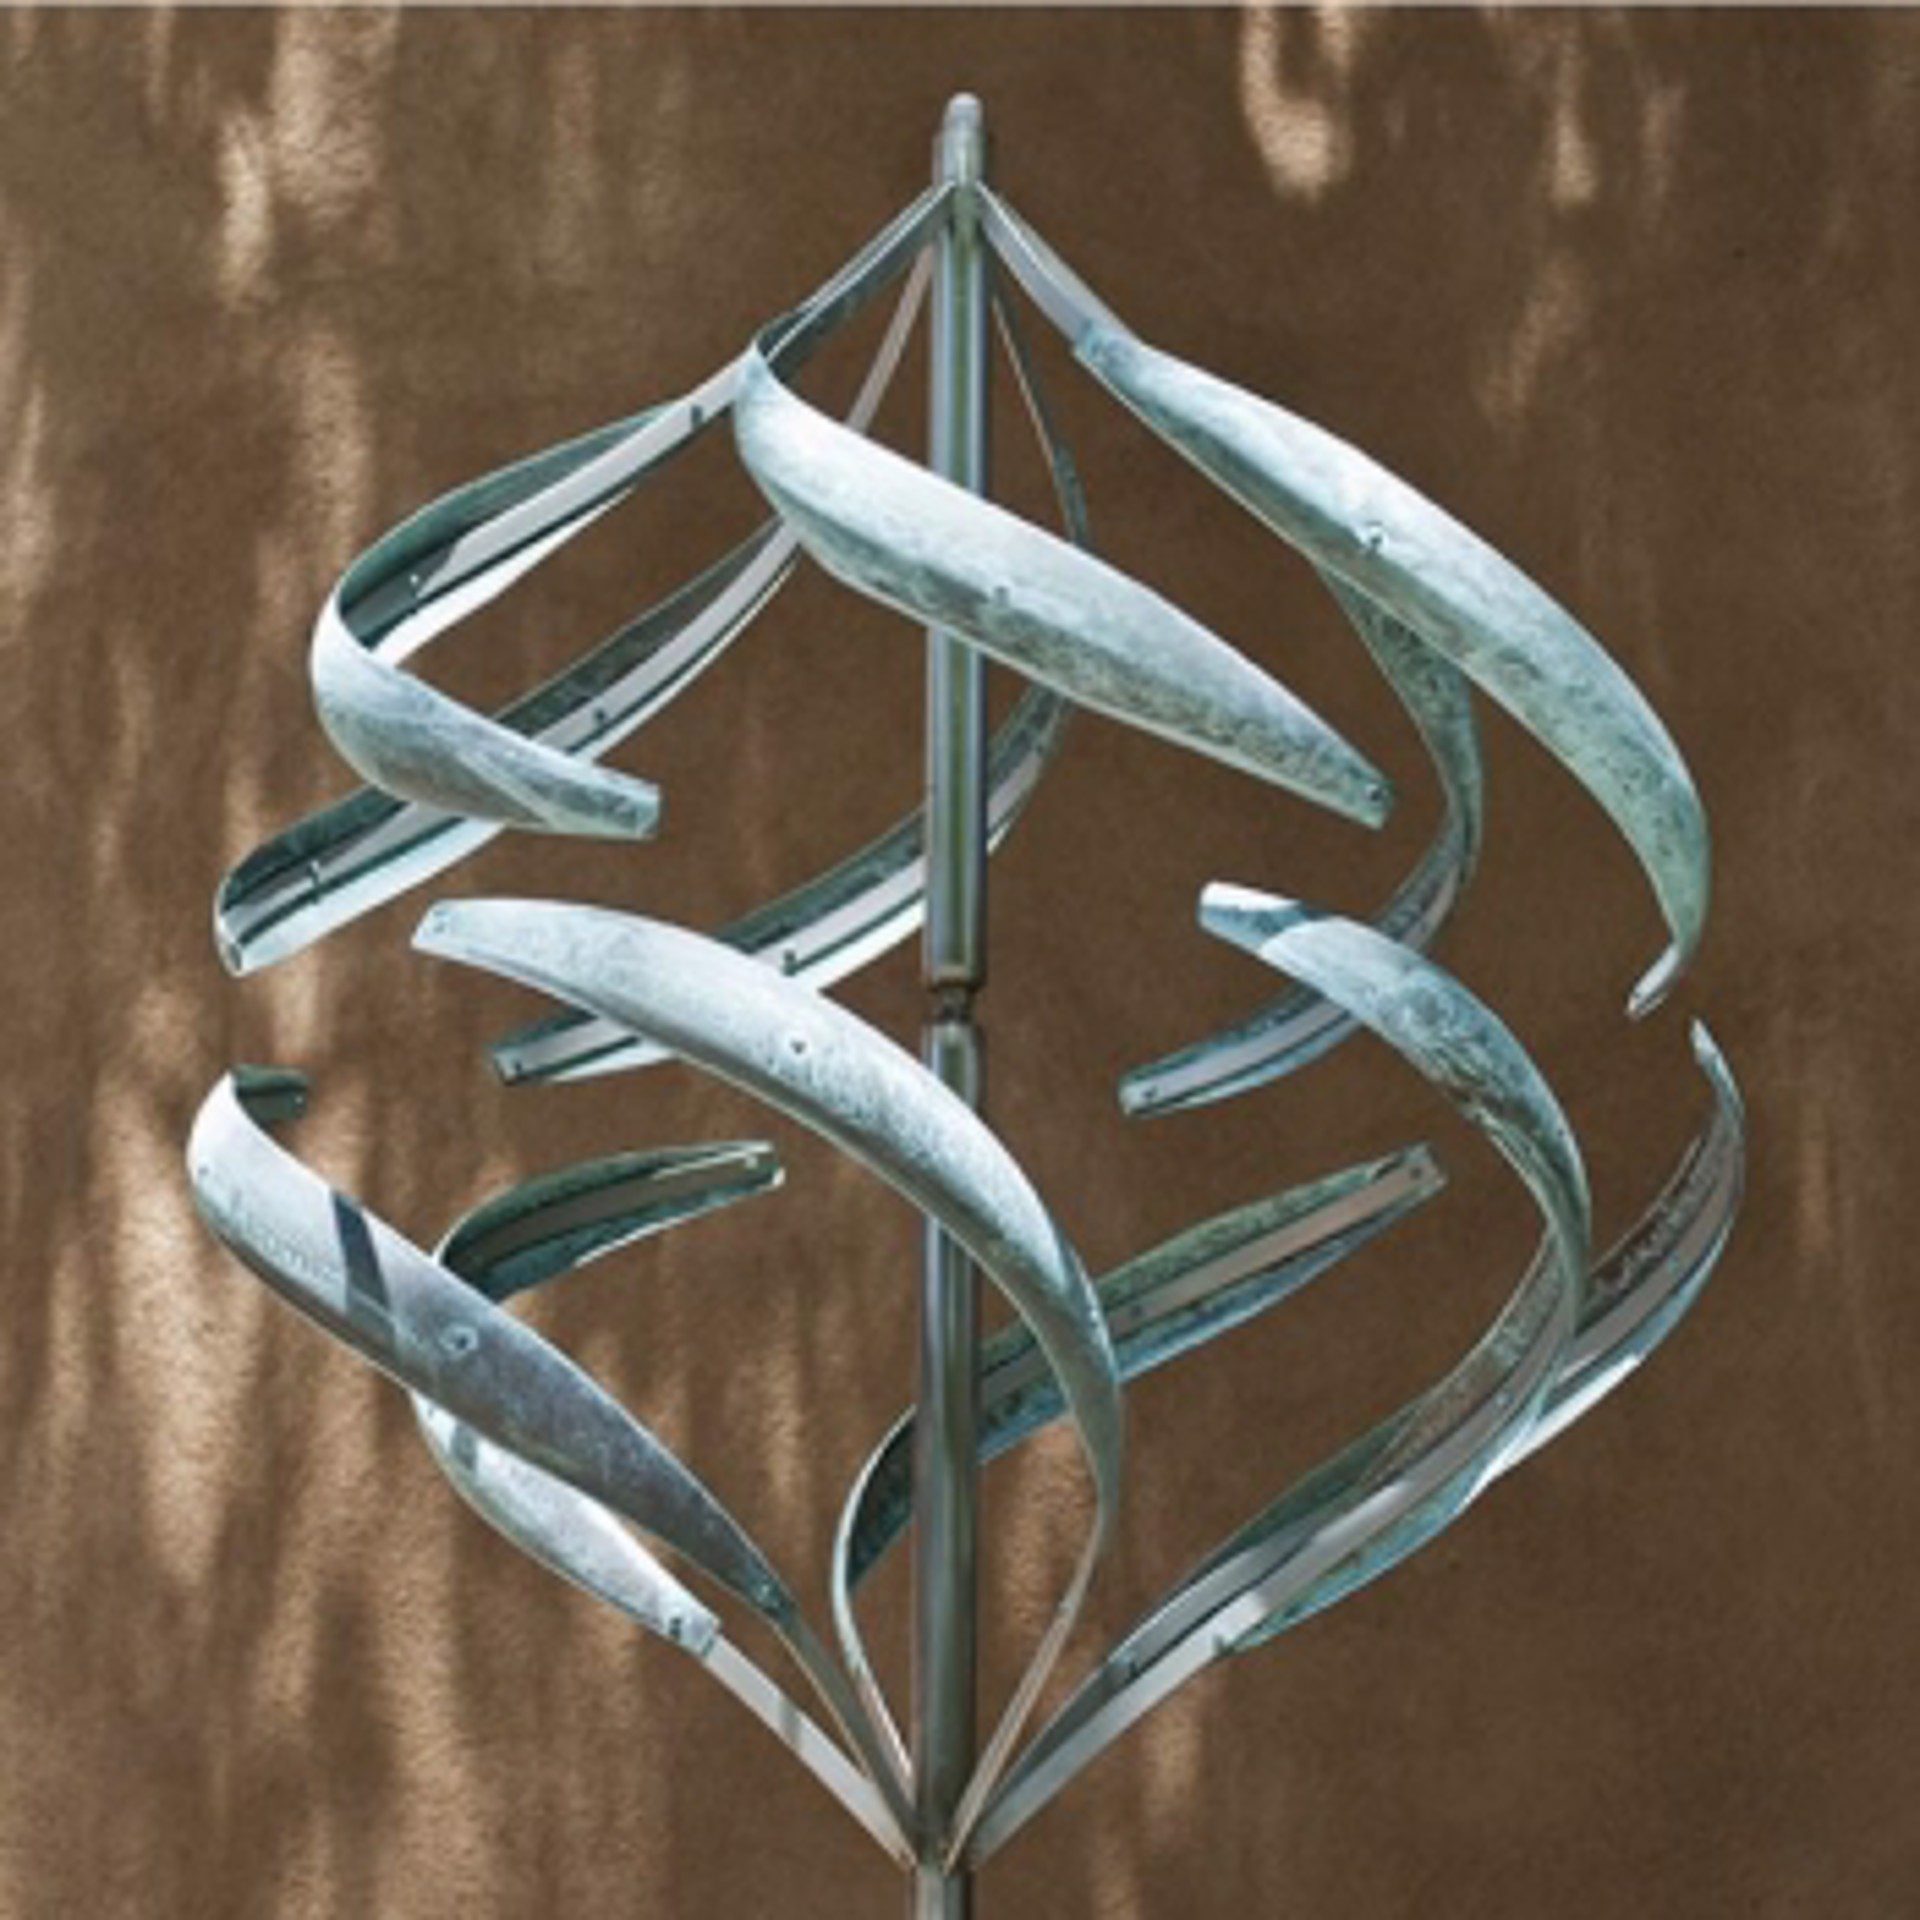 Arabesque - Available in Colors & Pole Sizes by Mark White Wind Sculpture